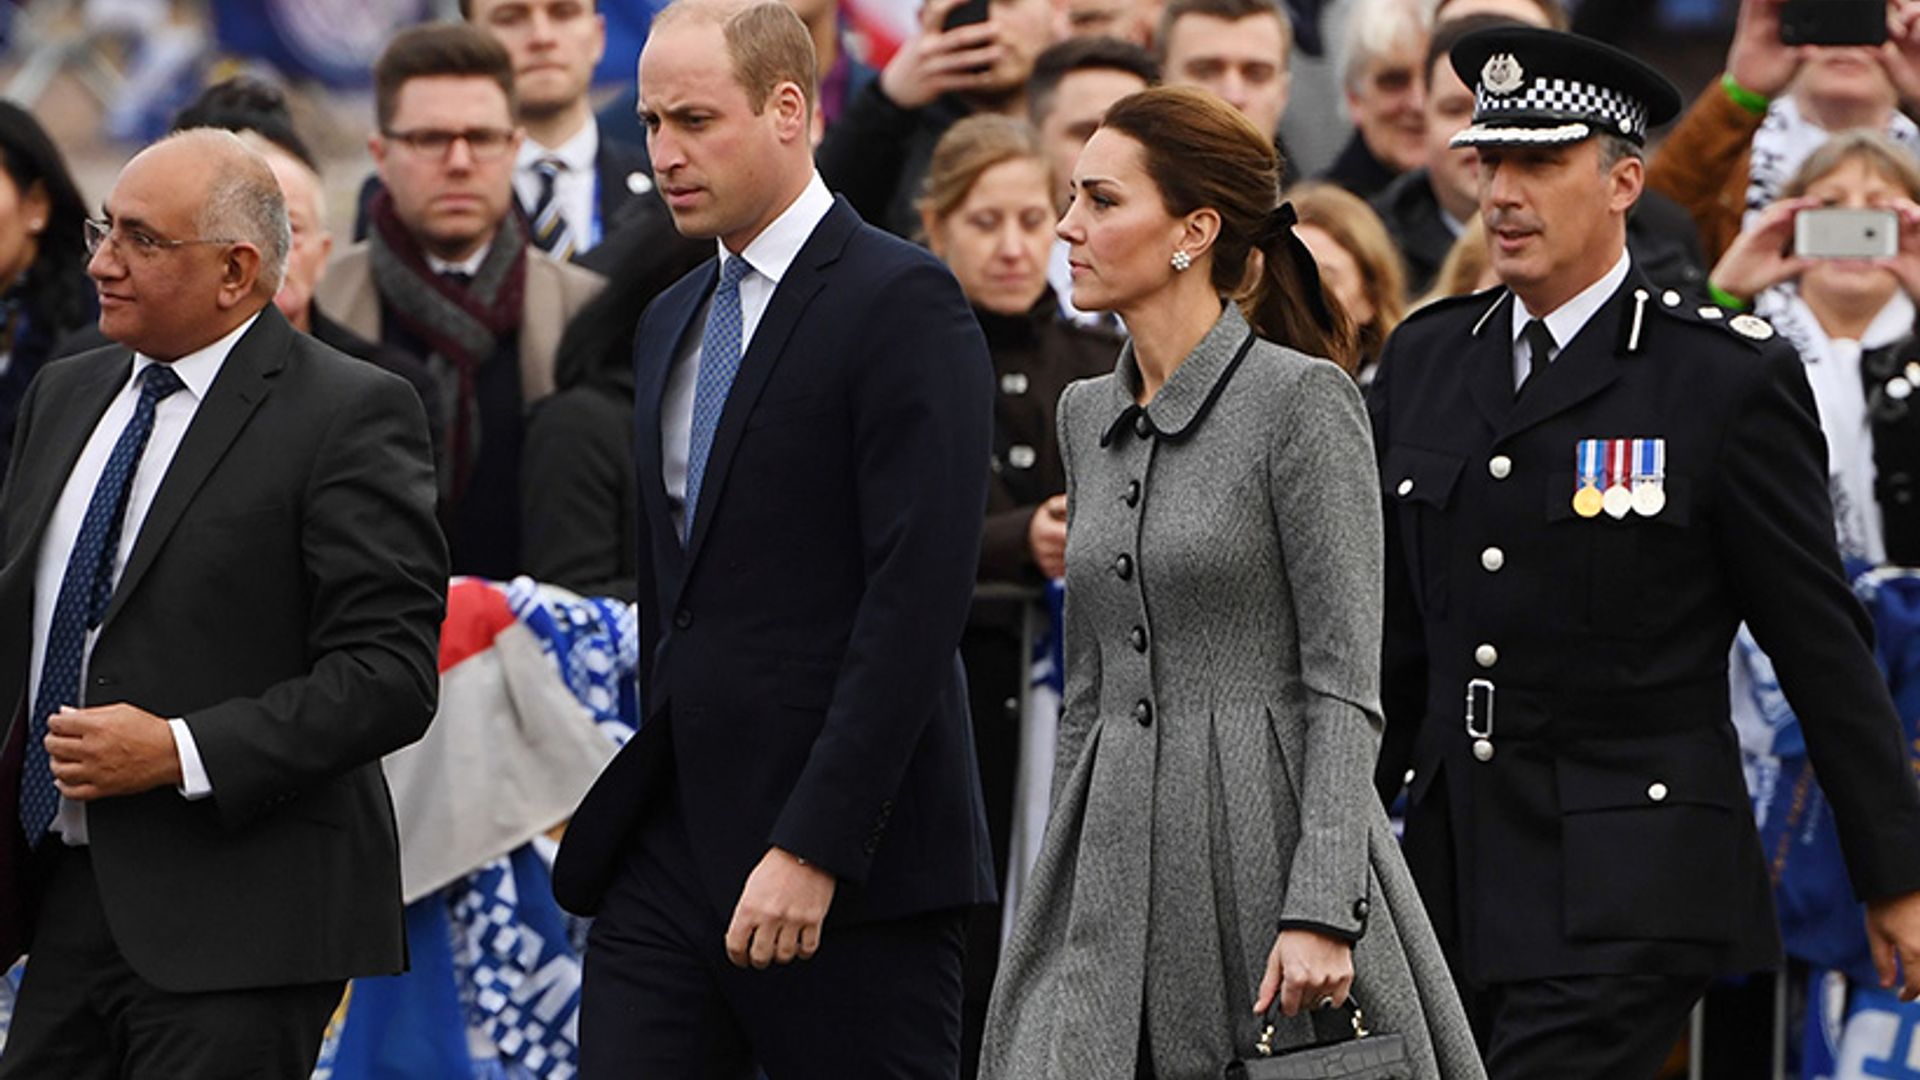 Prince William and Kate Middleton pay respect to Leicester City owner Vichai Srivaddhanaprabha - all the photos